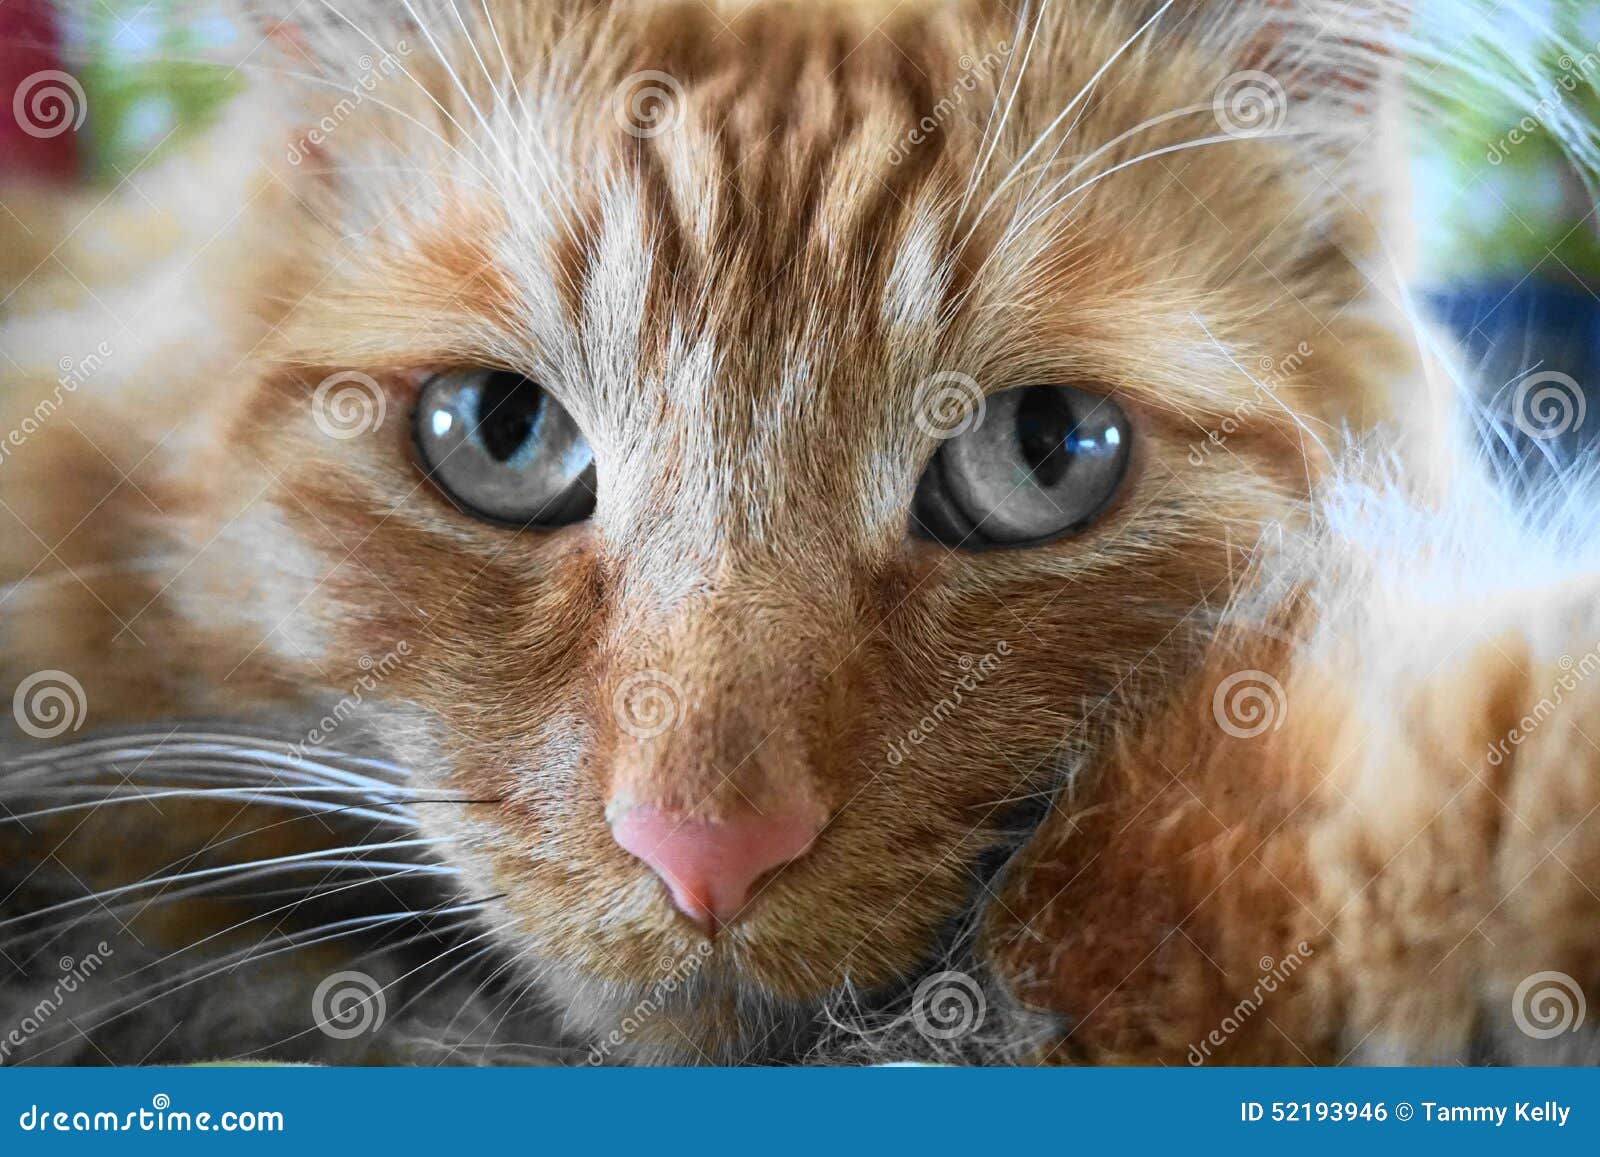 Sunny The Cat Orange Tabby With Blue Eyes Stock Photo Image Of Background Texture